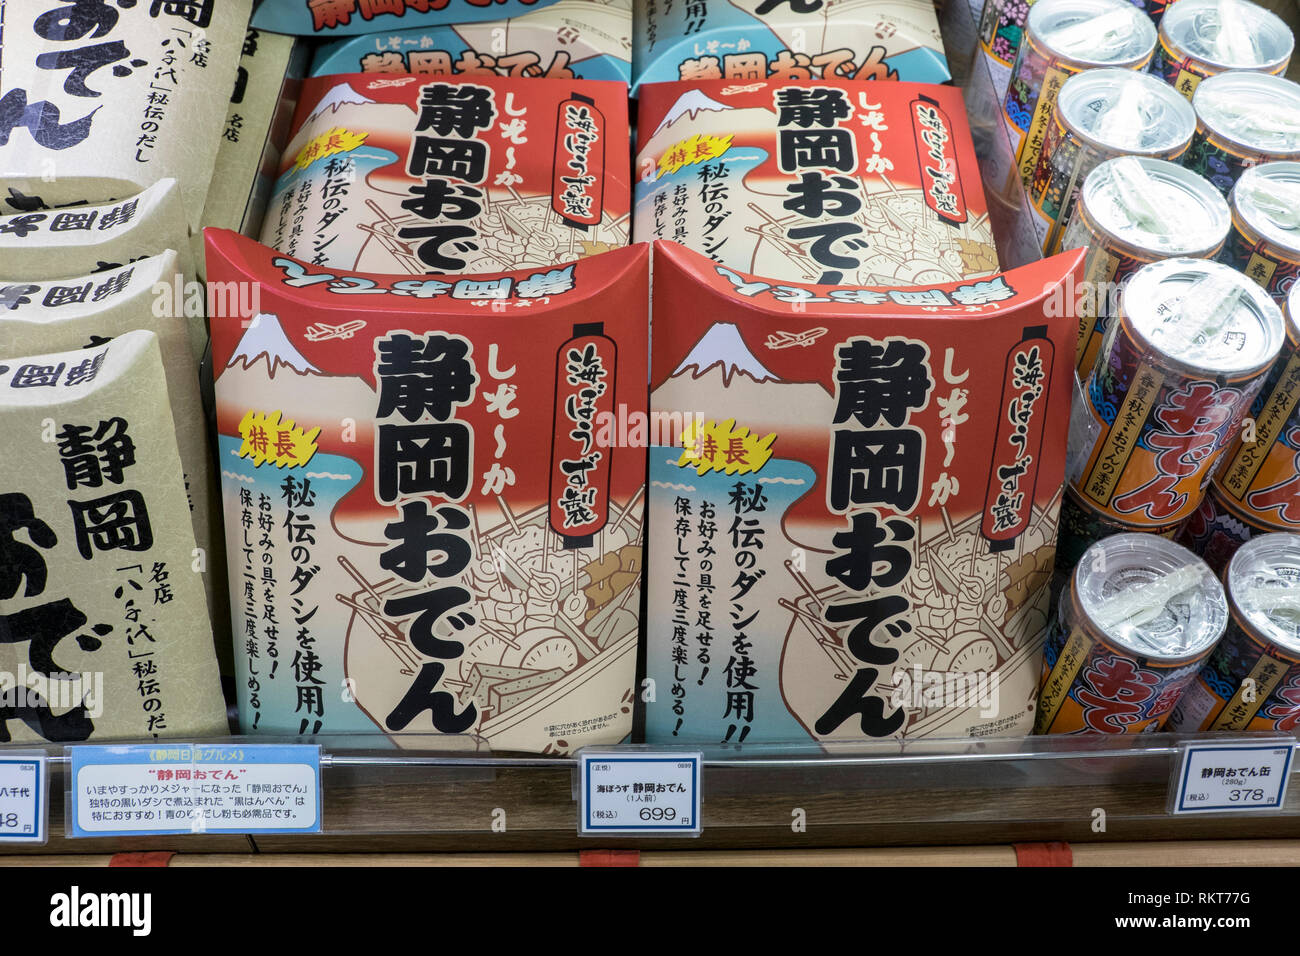 Japan, Shizuoka: boxes of Oden (Japanese one-pot dish) using the picture of Mount Fuji *** Local Caption *** Stock Photo